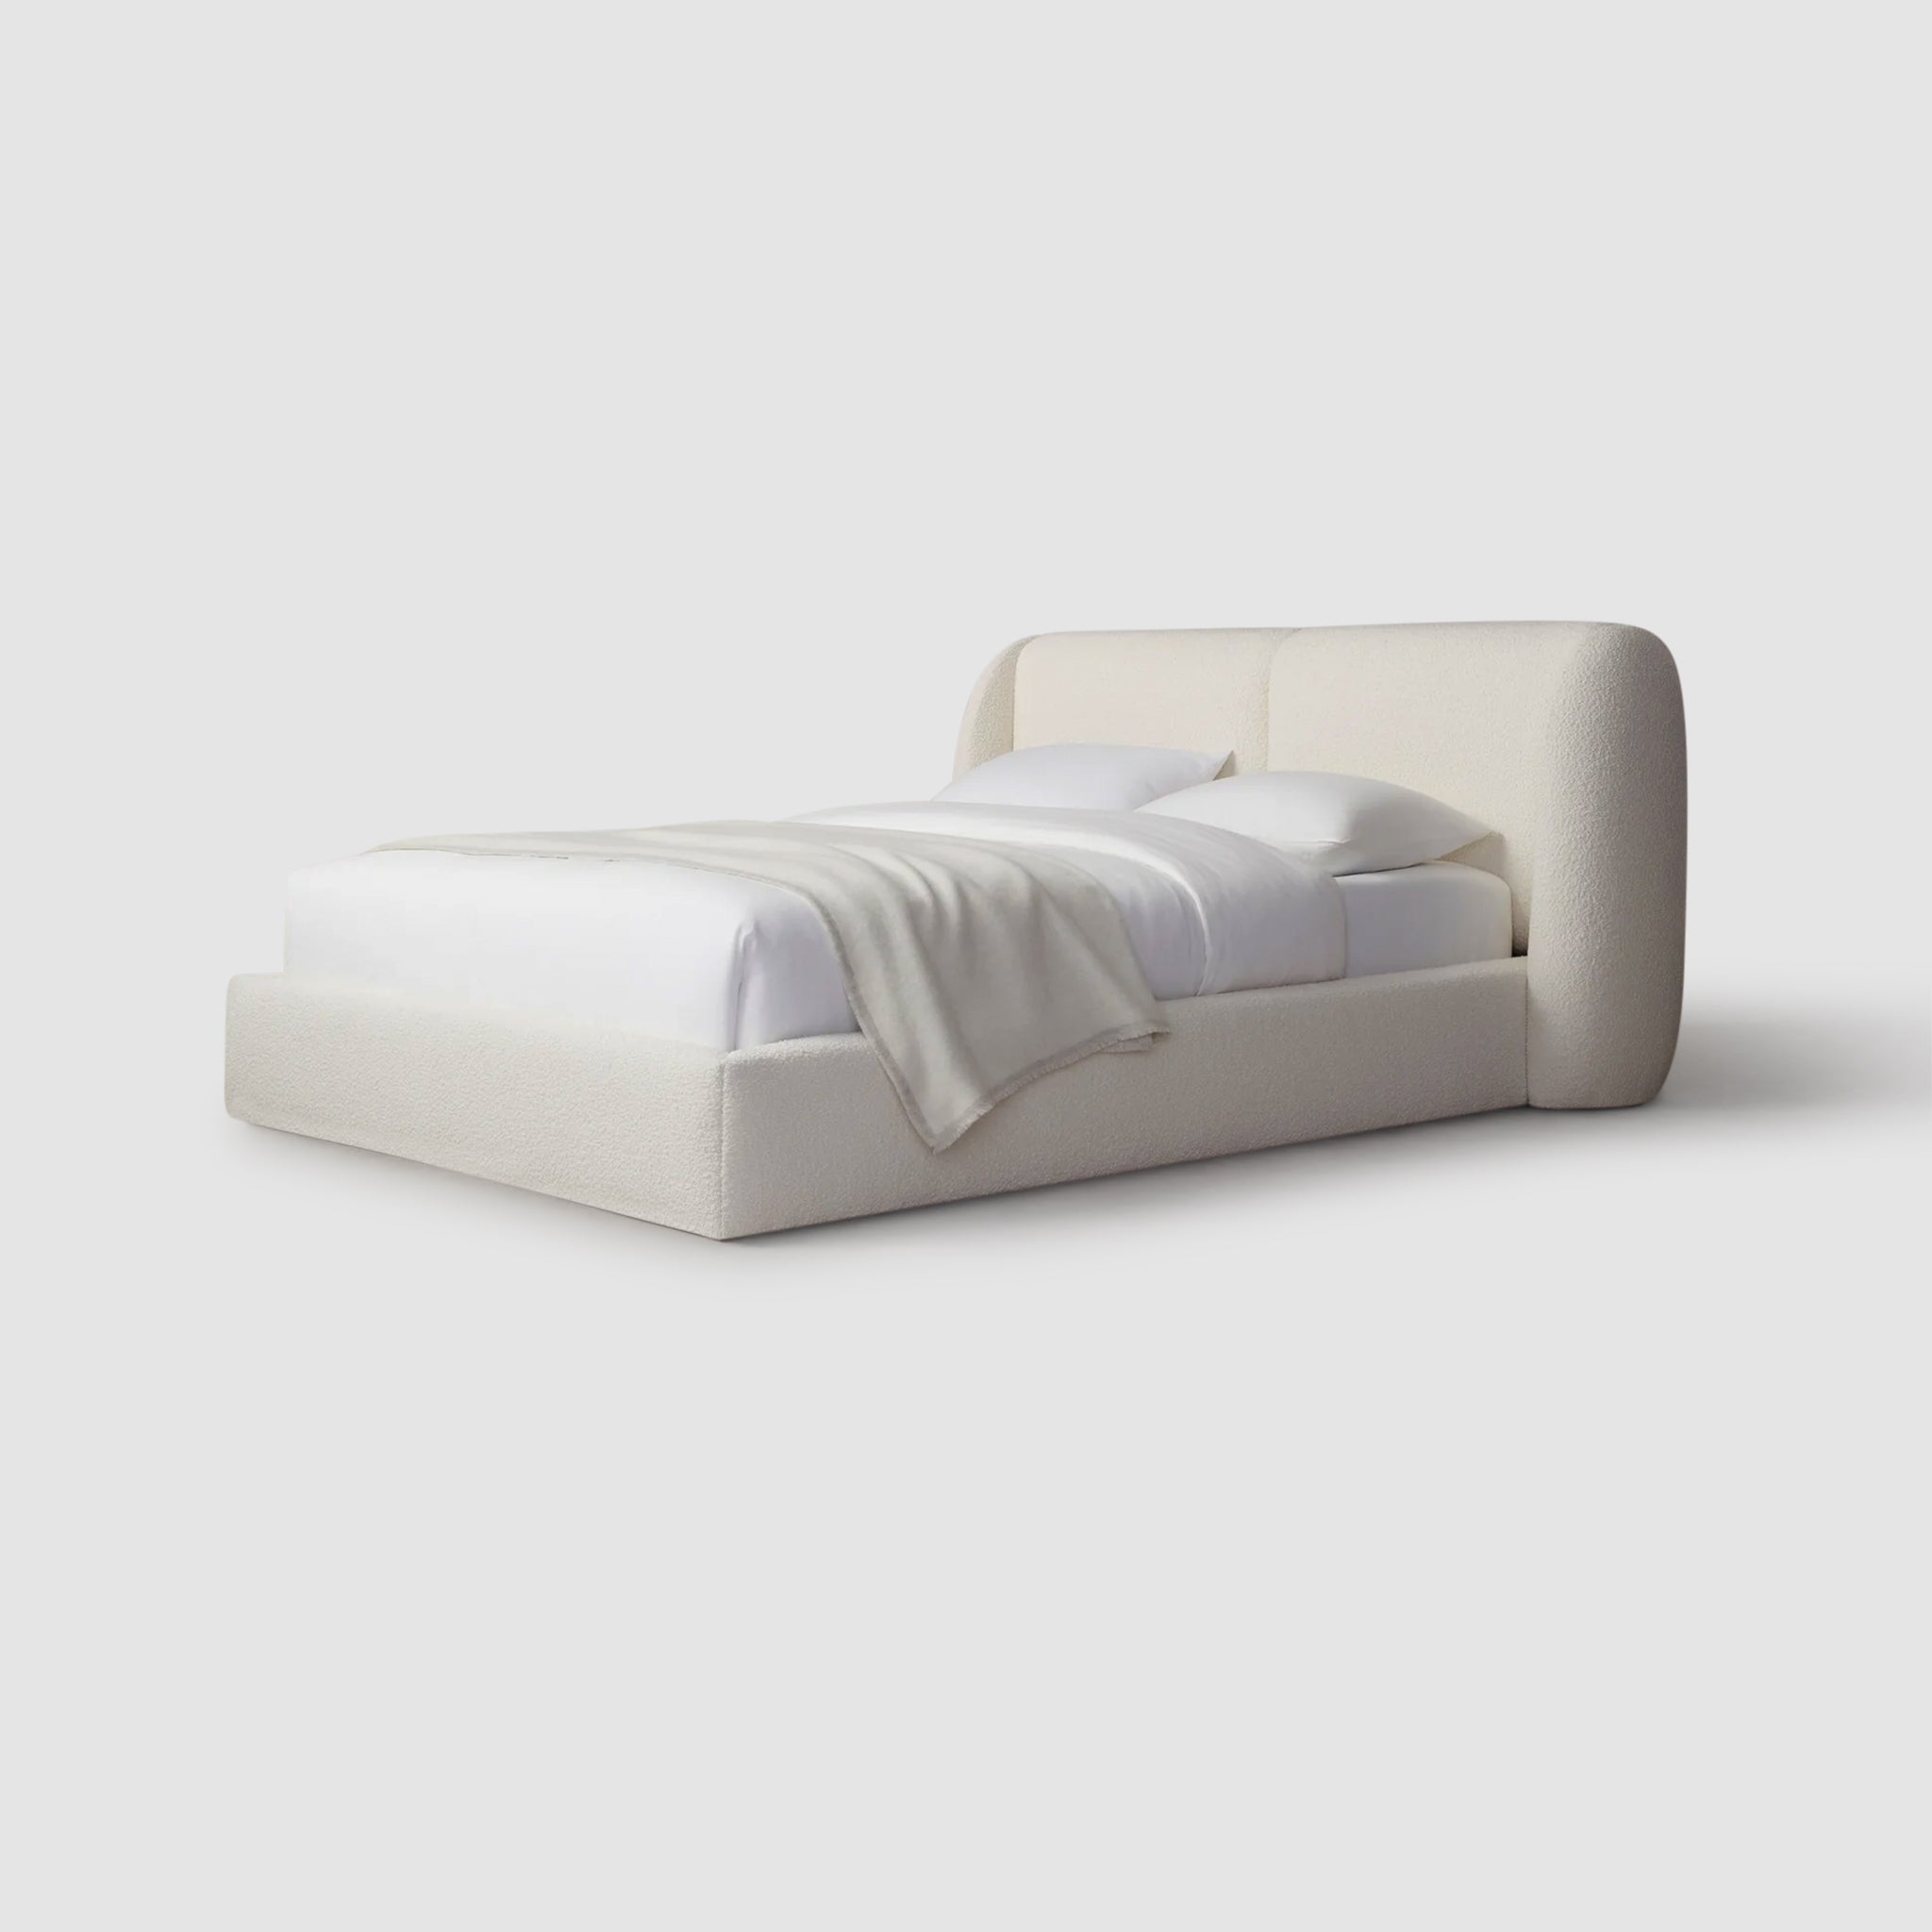 Relax in luxury with the Ashley platform bed featuring a plush white blanket.